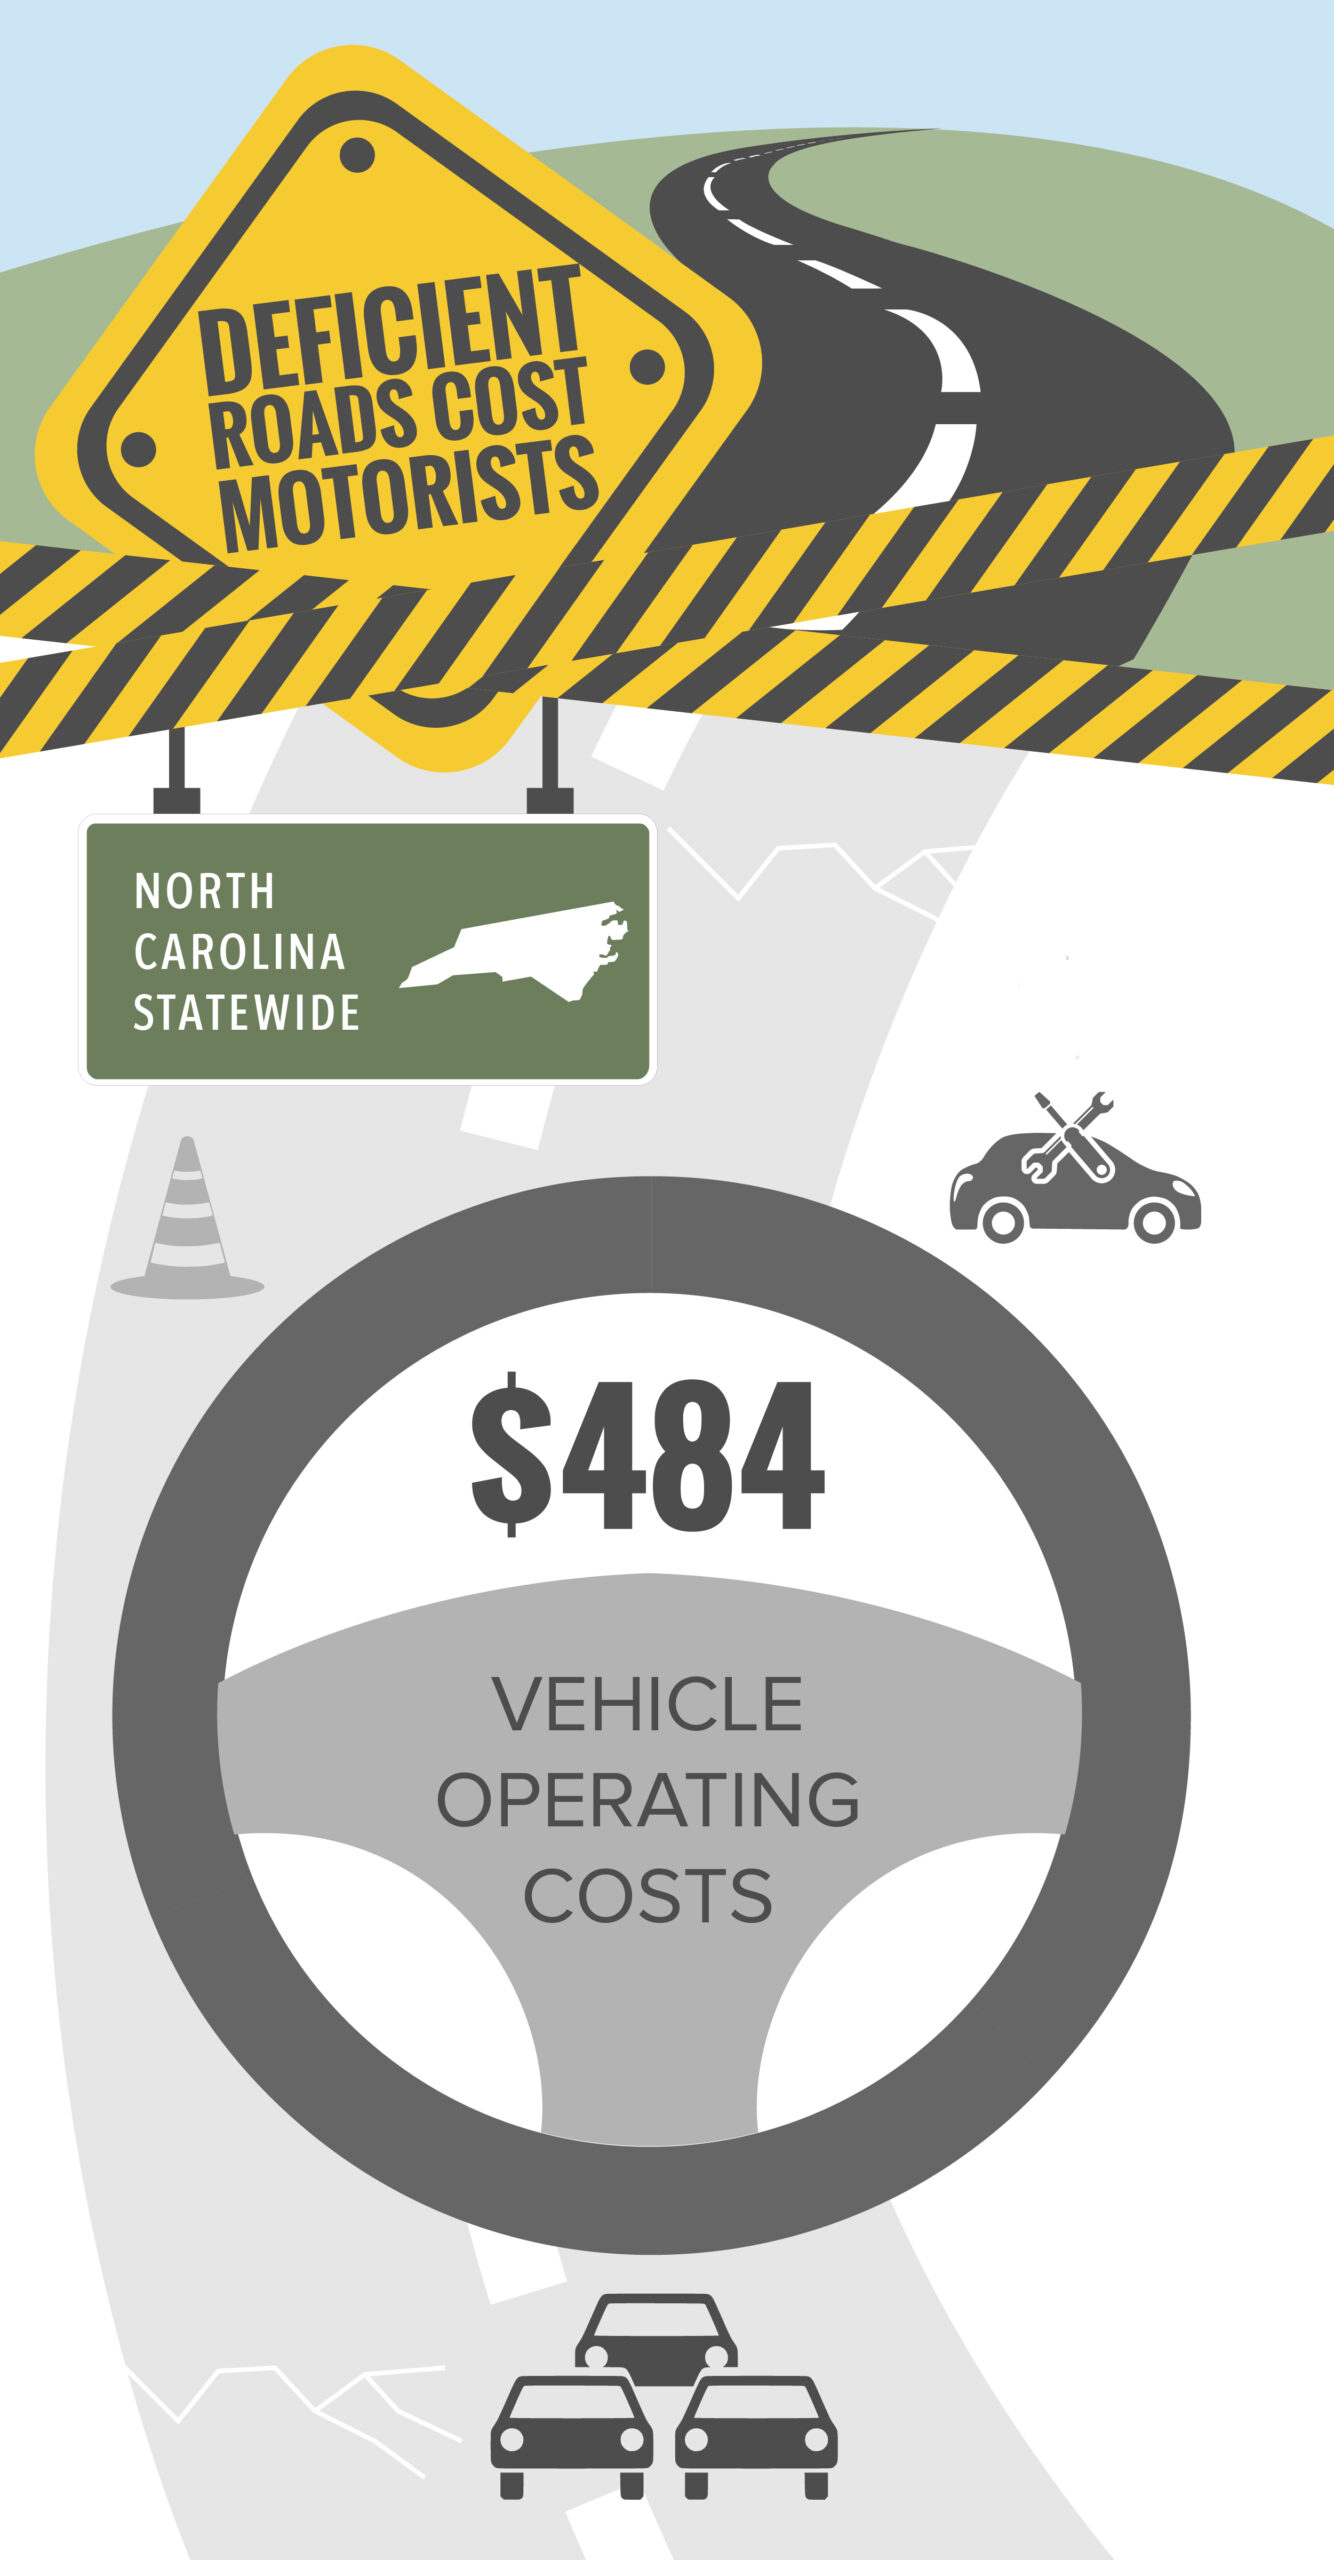 North Carolina Deficient Roads Cost to Motorists Infographic – April 2023